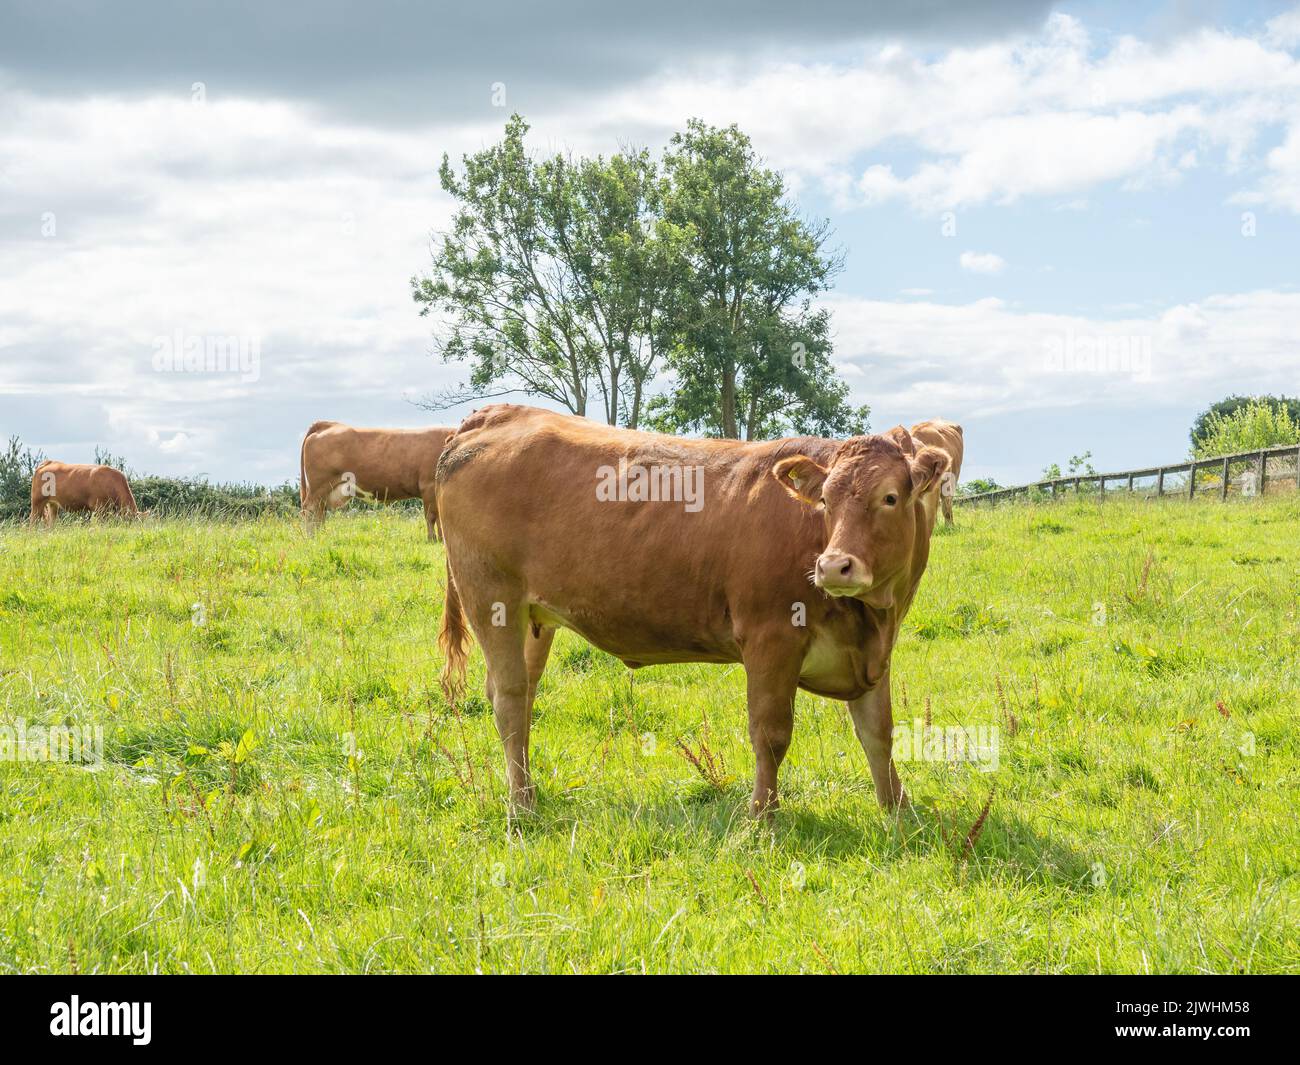 Cows grazing in a field in the Cloughanover district, near Headford in County Galway, Ireland. Stock Photo